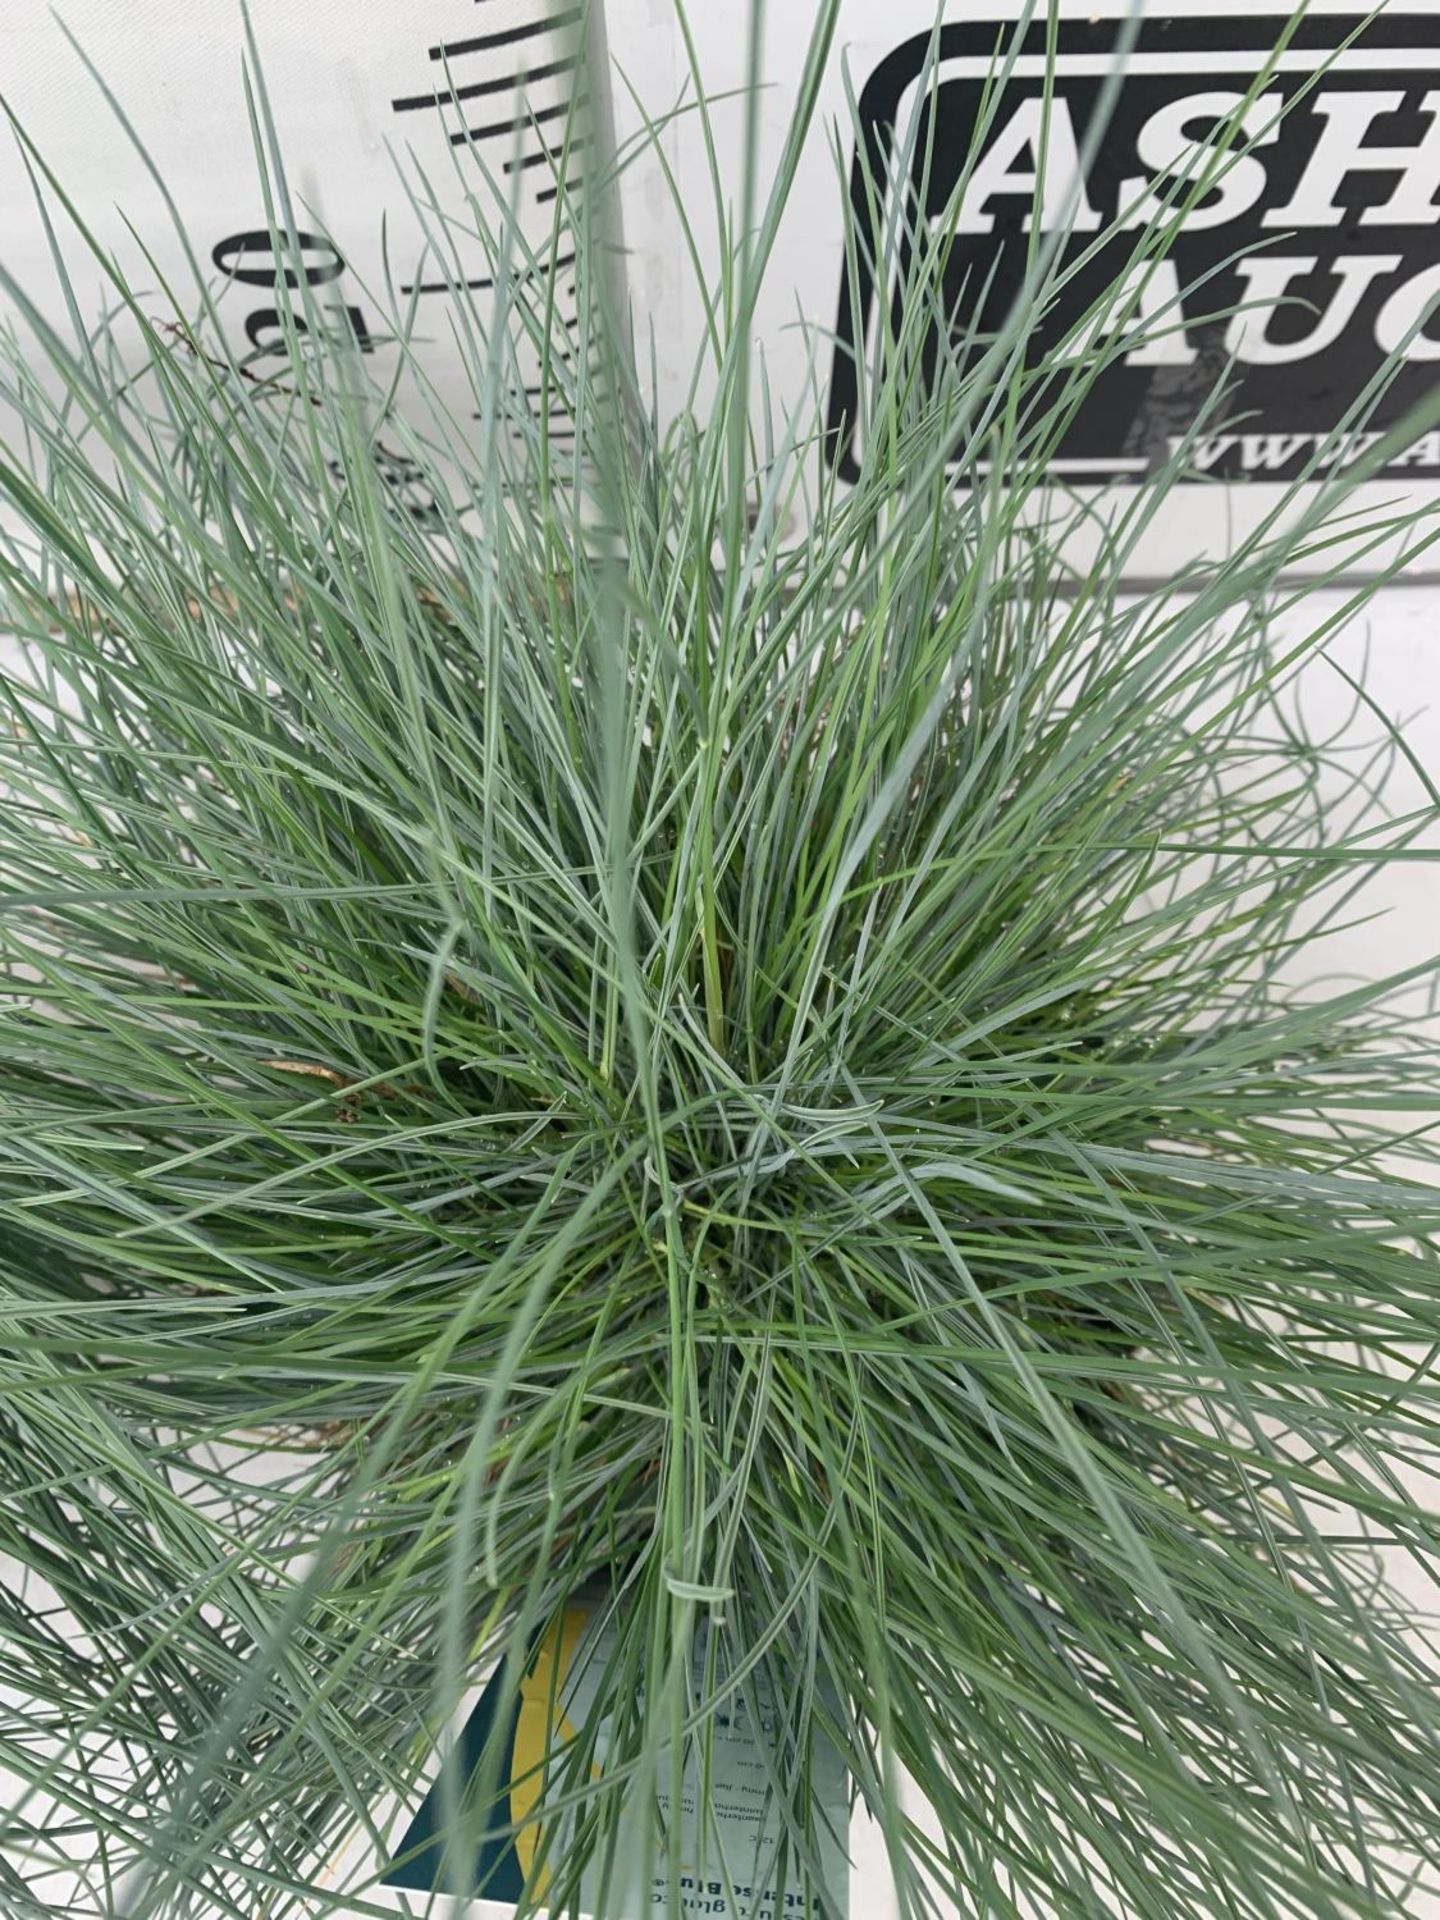 TWO FESTUCA GLAUCA 'INTENSE BLUE' ORNAMENTAL GRASSES IN 2 LTR POTS APPROX 40CM IN HEIGHT PLUS VAT TO - Image 3 of 4